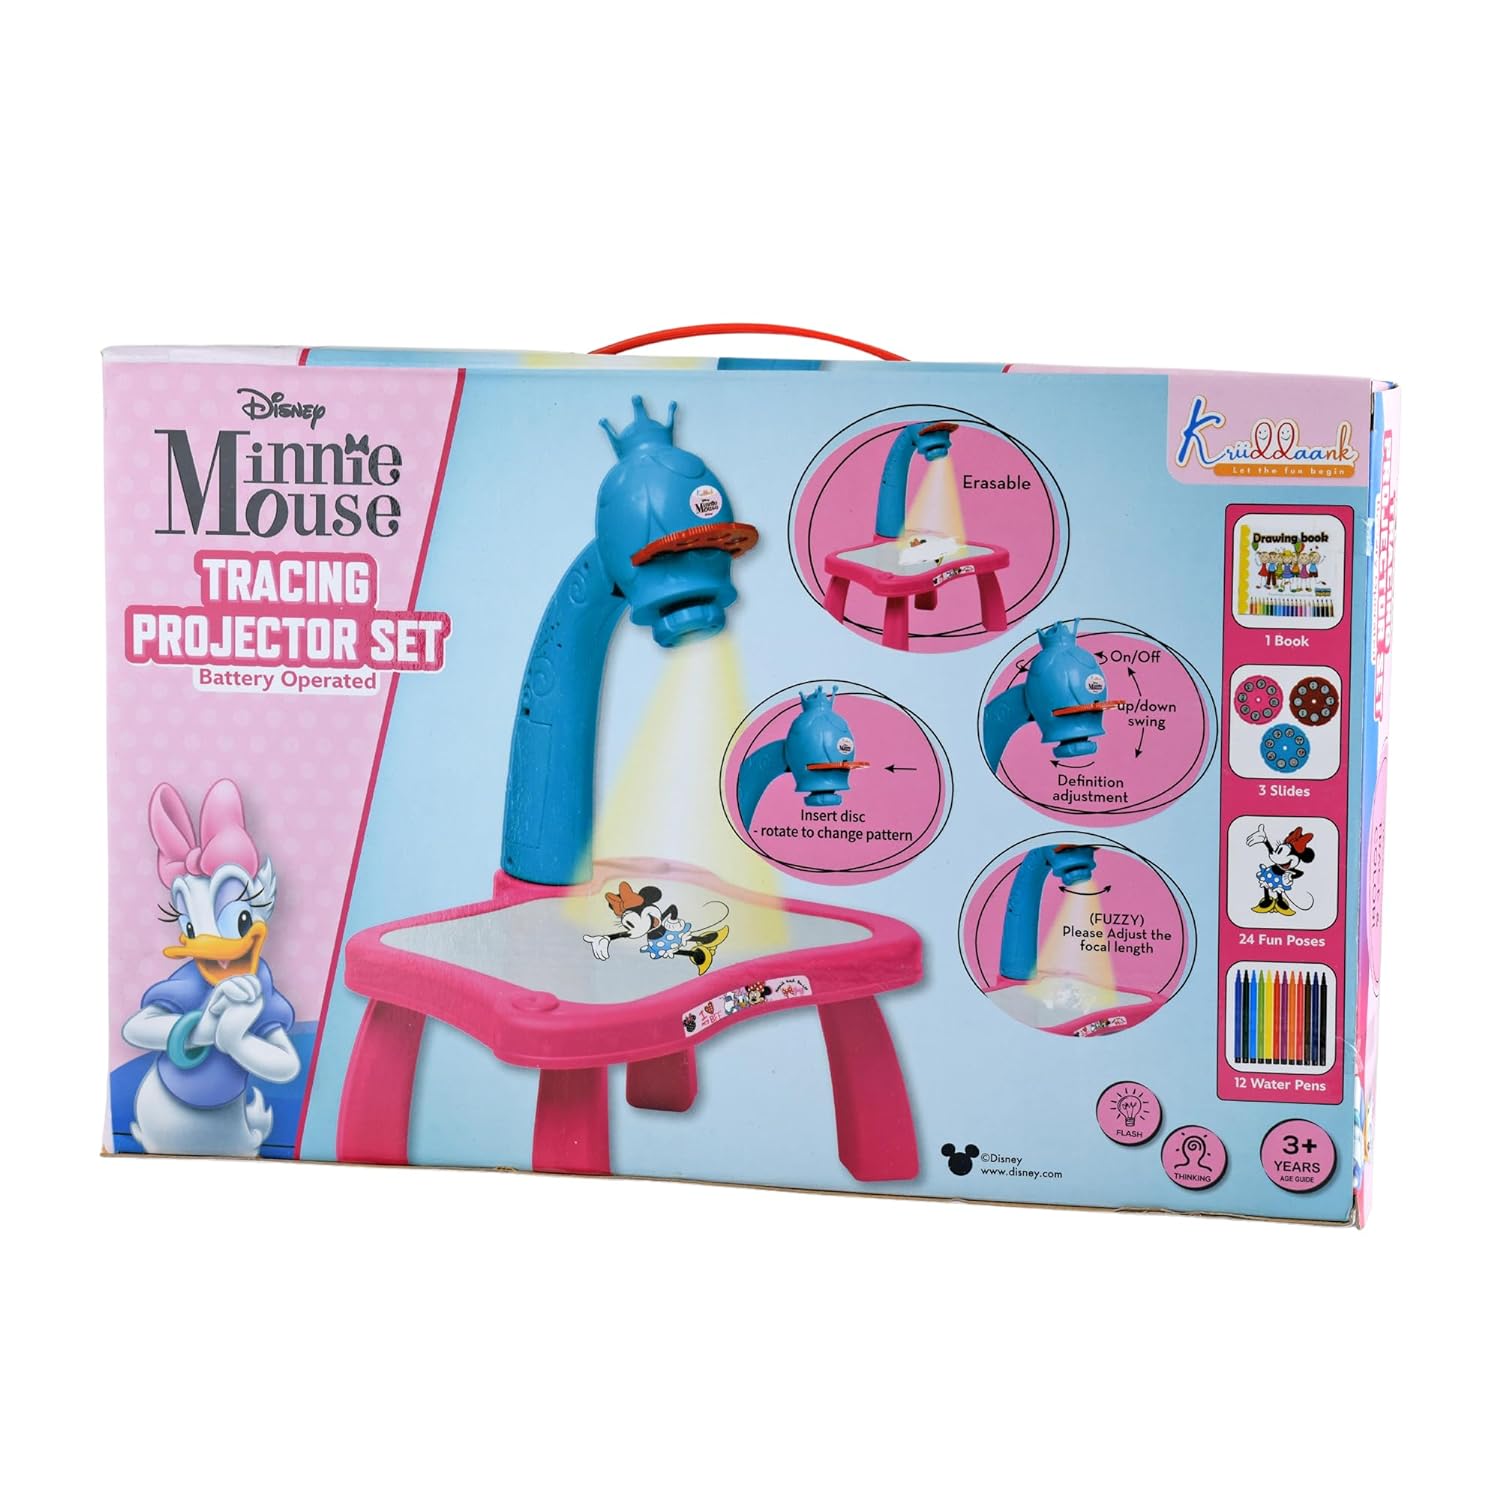 Minnie Mouse Drawing Kids Projector Set Painting Desk Table with Patterns & Colorful Water Pens Table Lamp for Better Creativity & Education Board Game for Kids